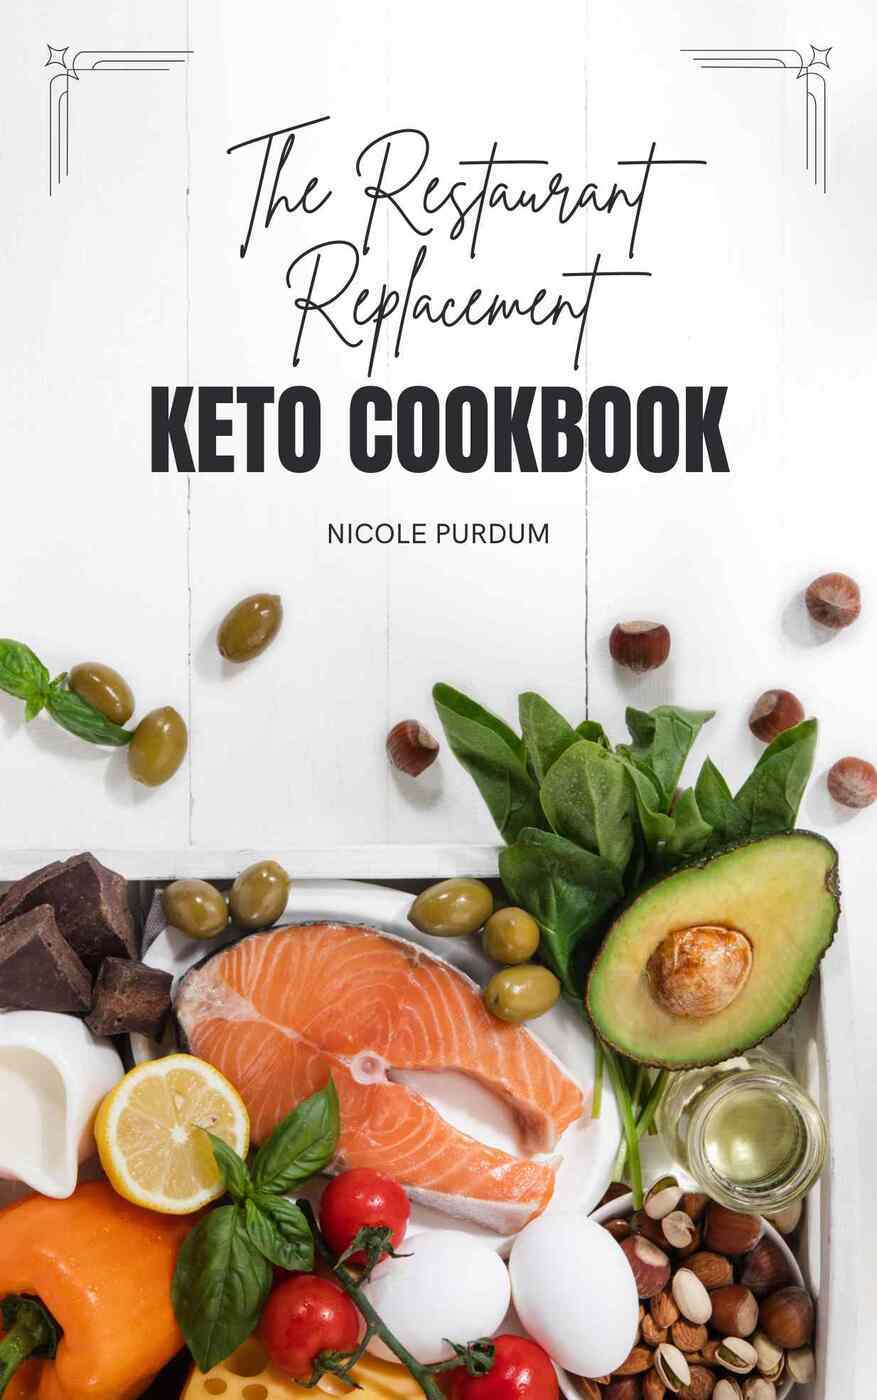 The Restaurant Replacement Keto Cookbook